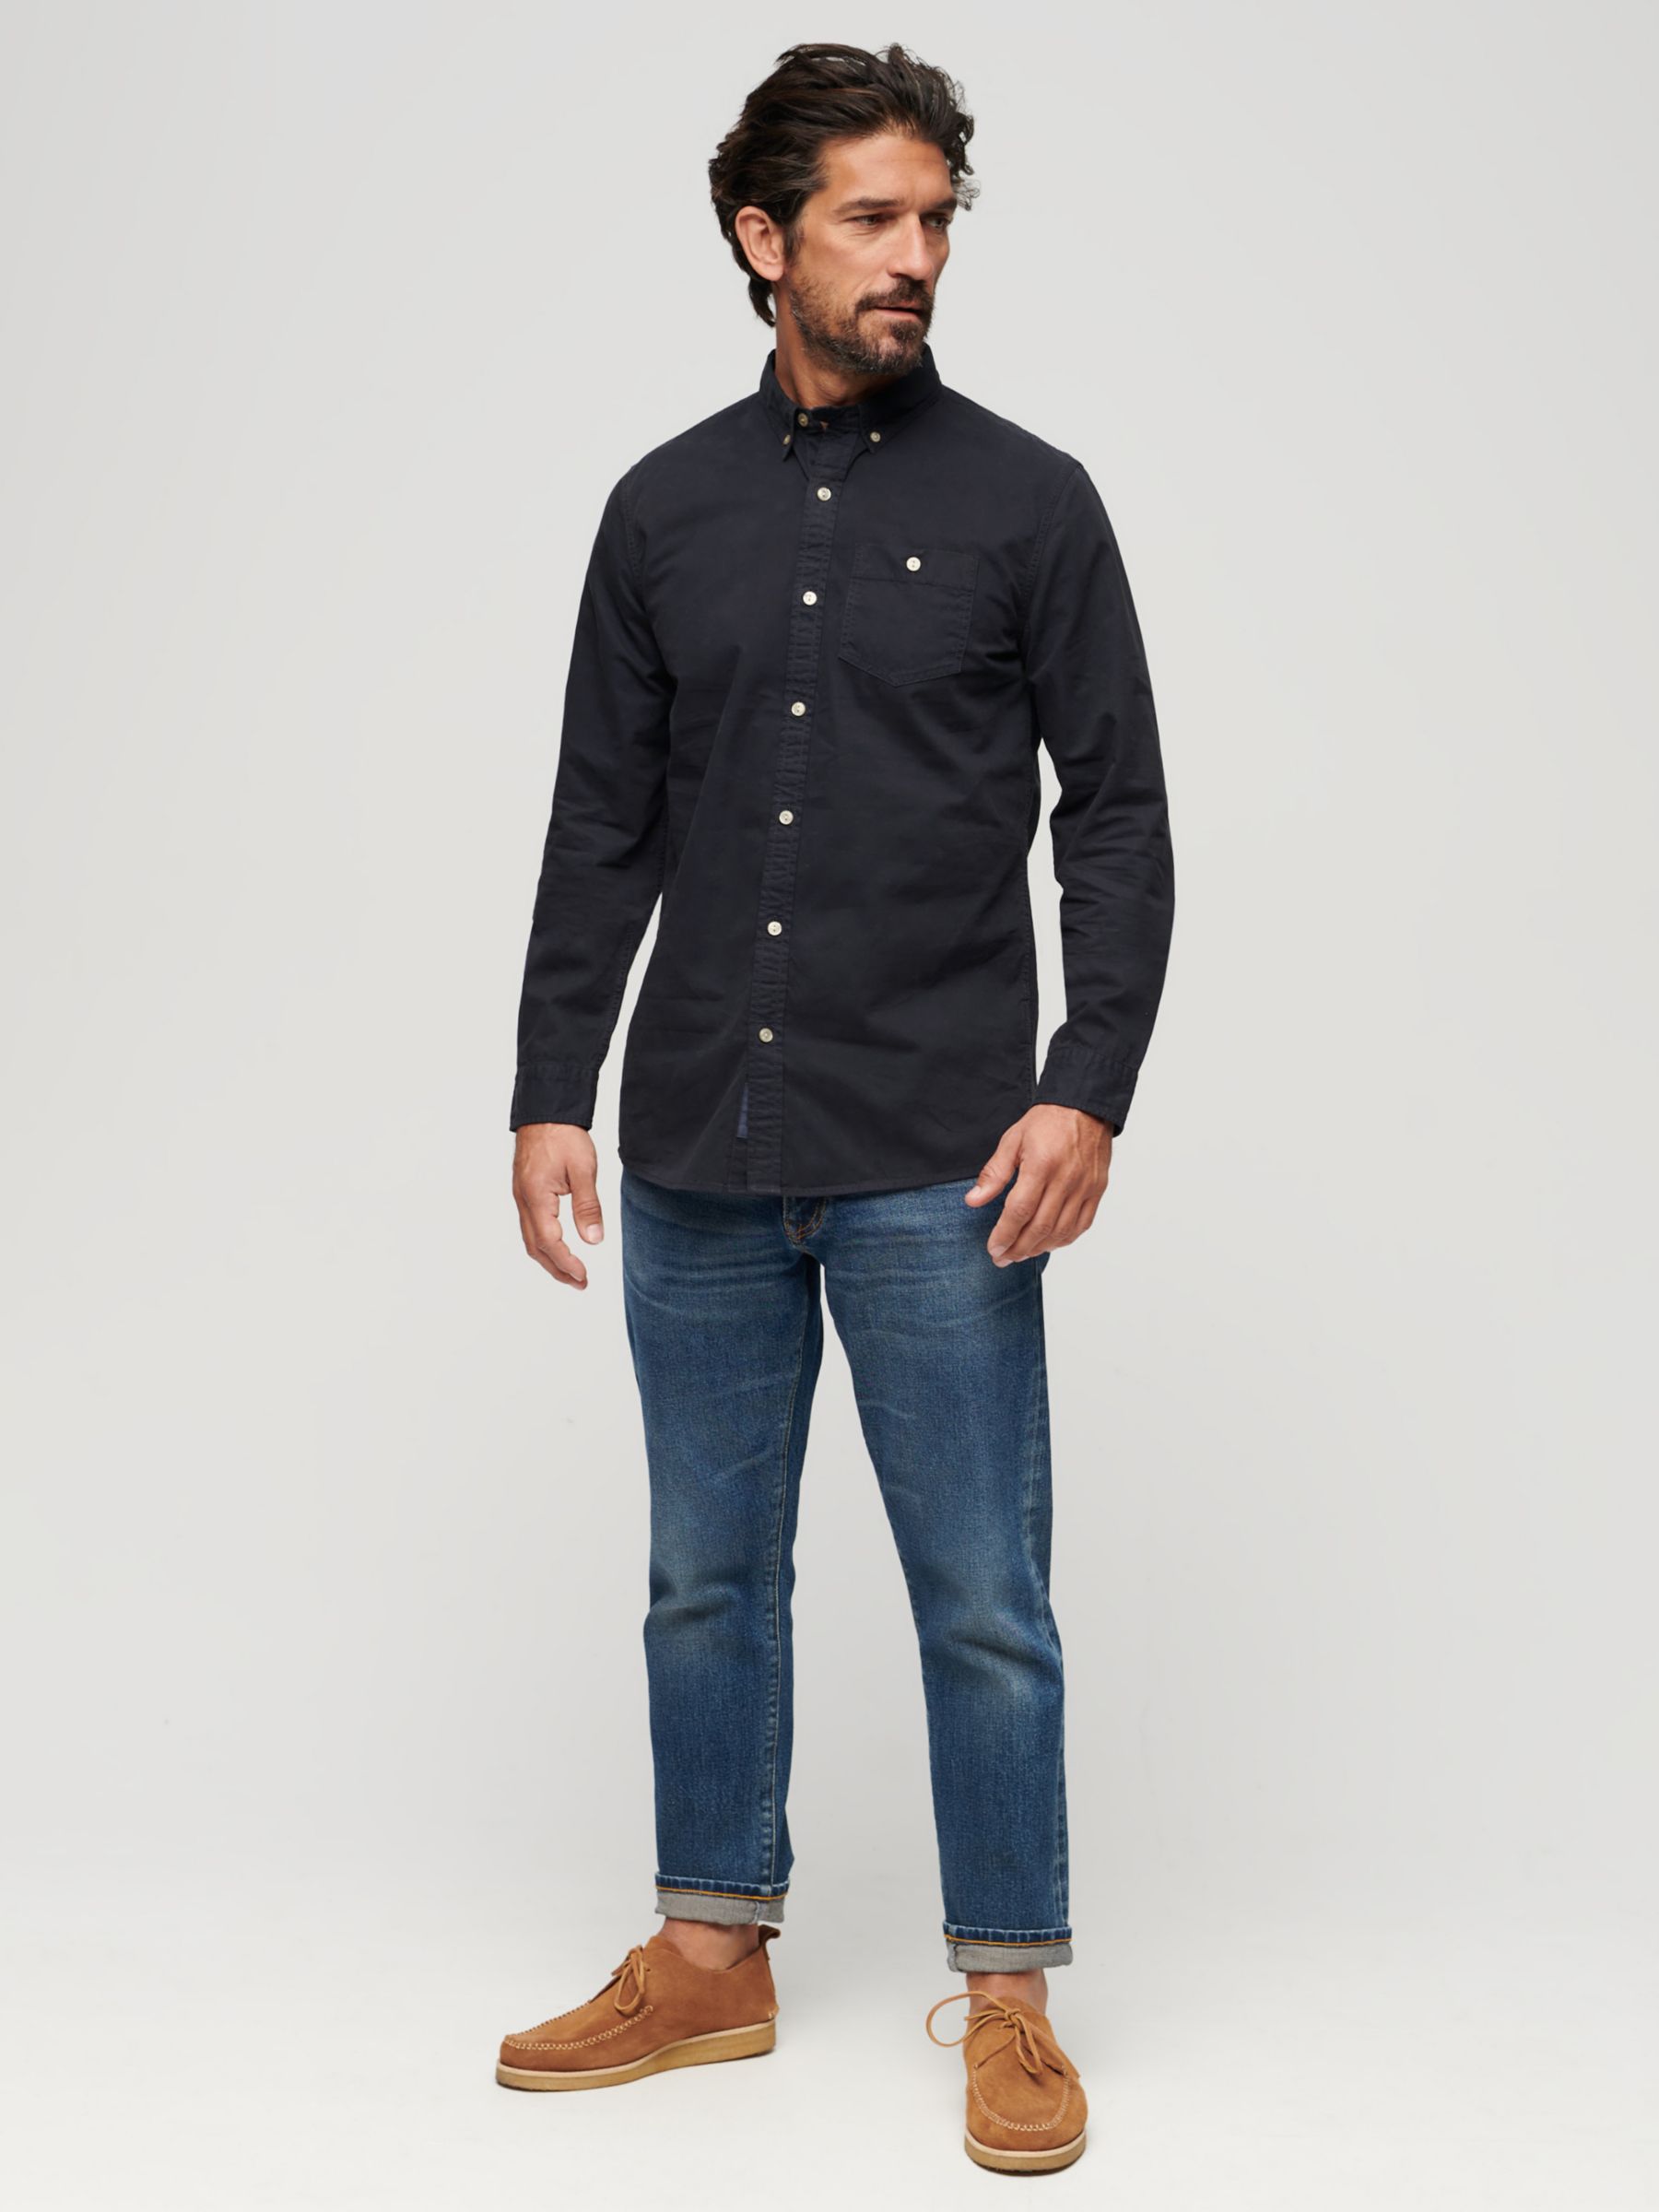 Buy Superdry The Merchant Store Cotton Long Sleeve Shirt Online at johnlewis.com